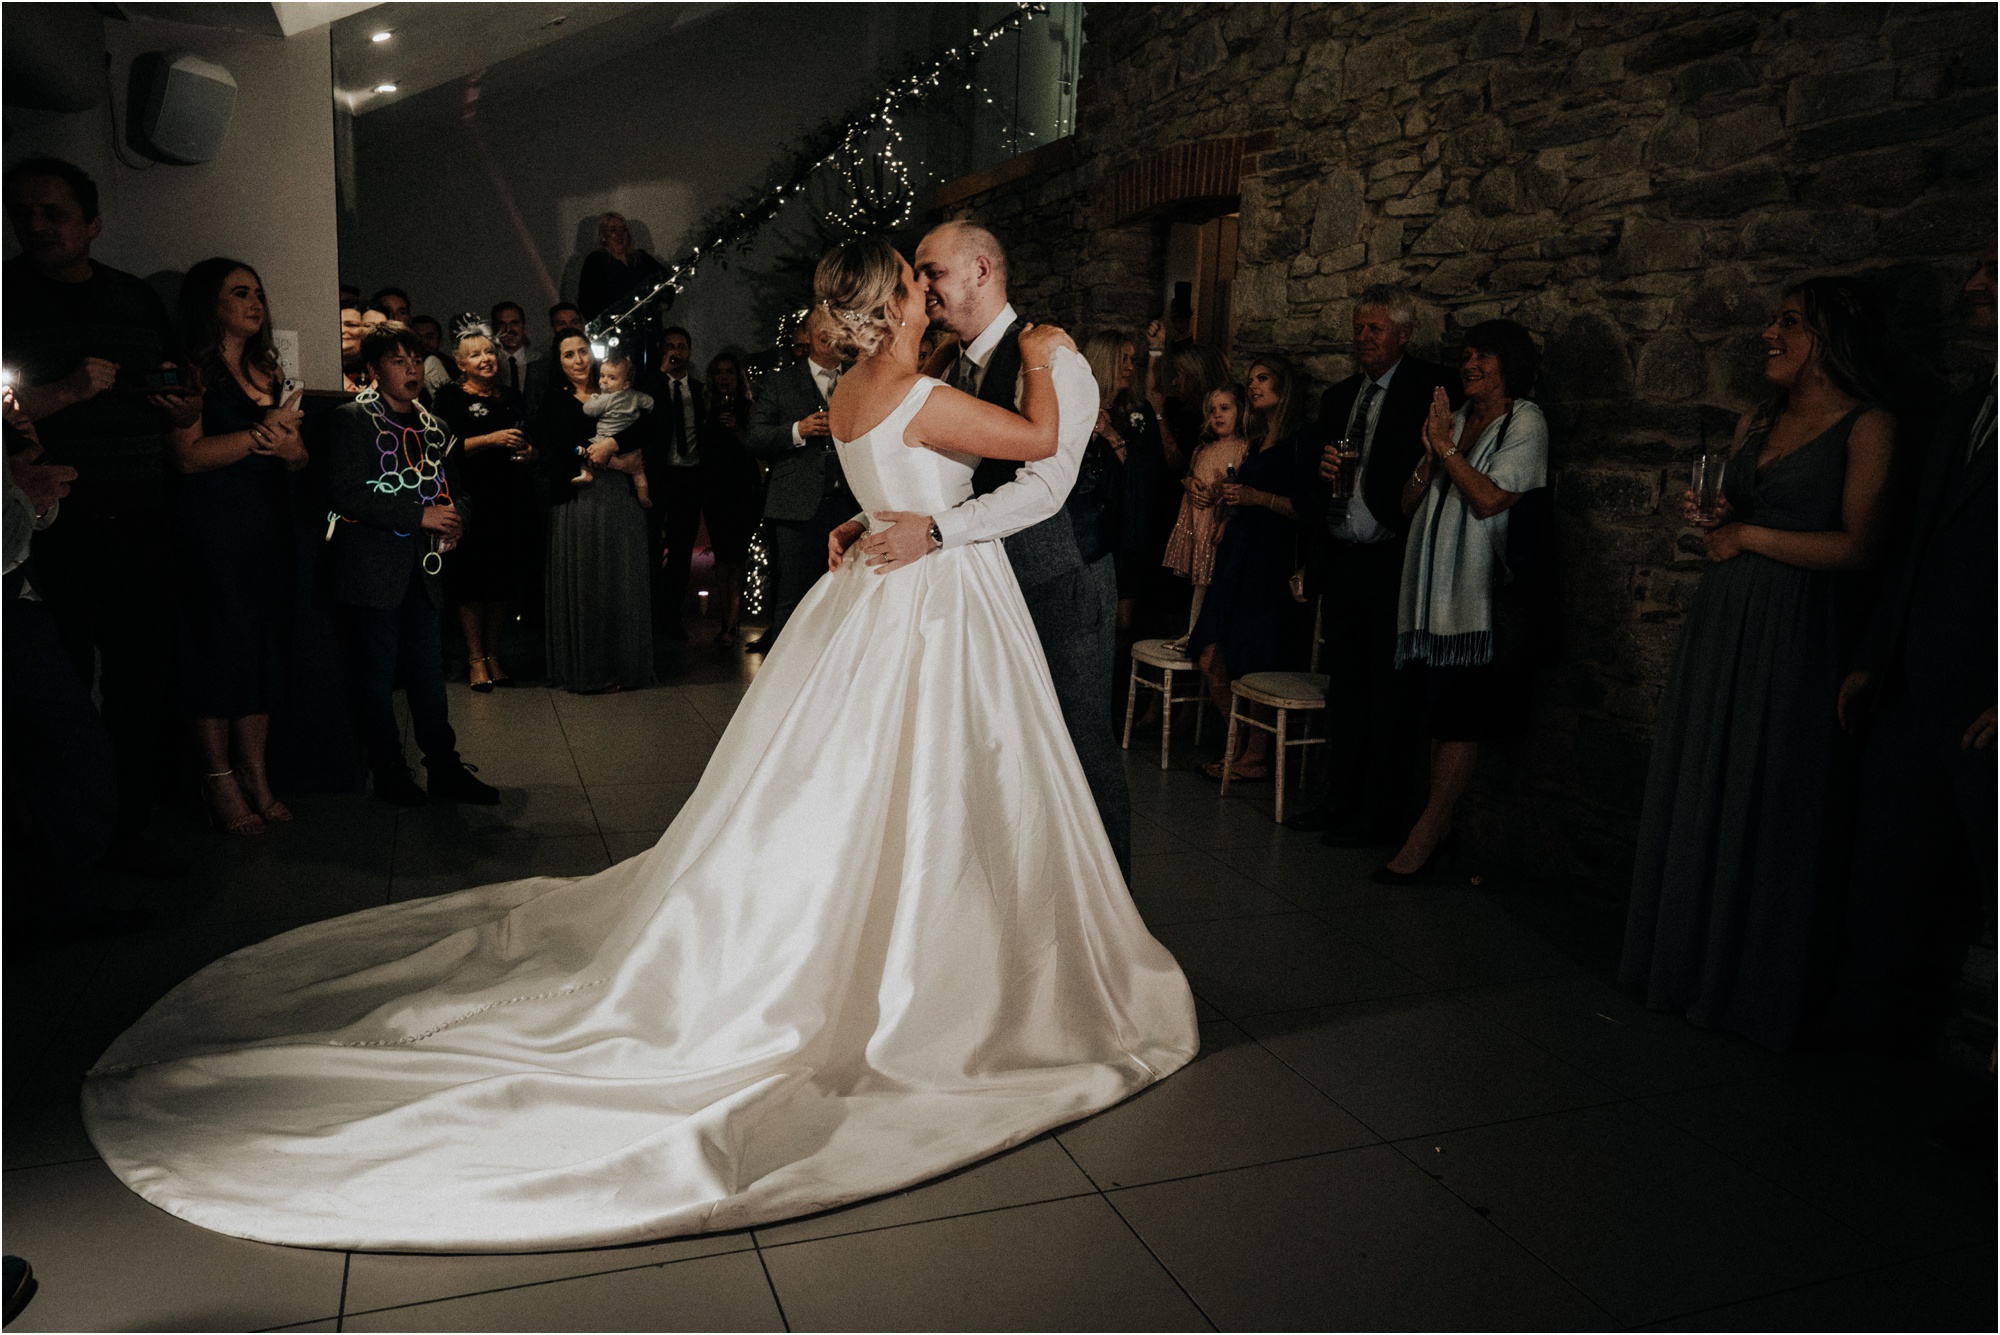 Connie and Lewis's wedding day at Trevenna Farm, photographed by Younger Photography who are Devon wedding photographers